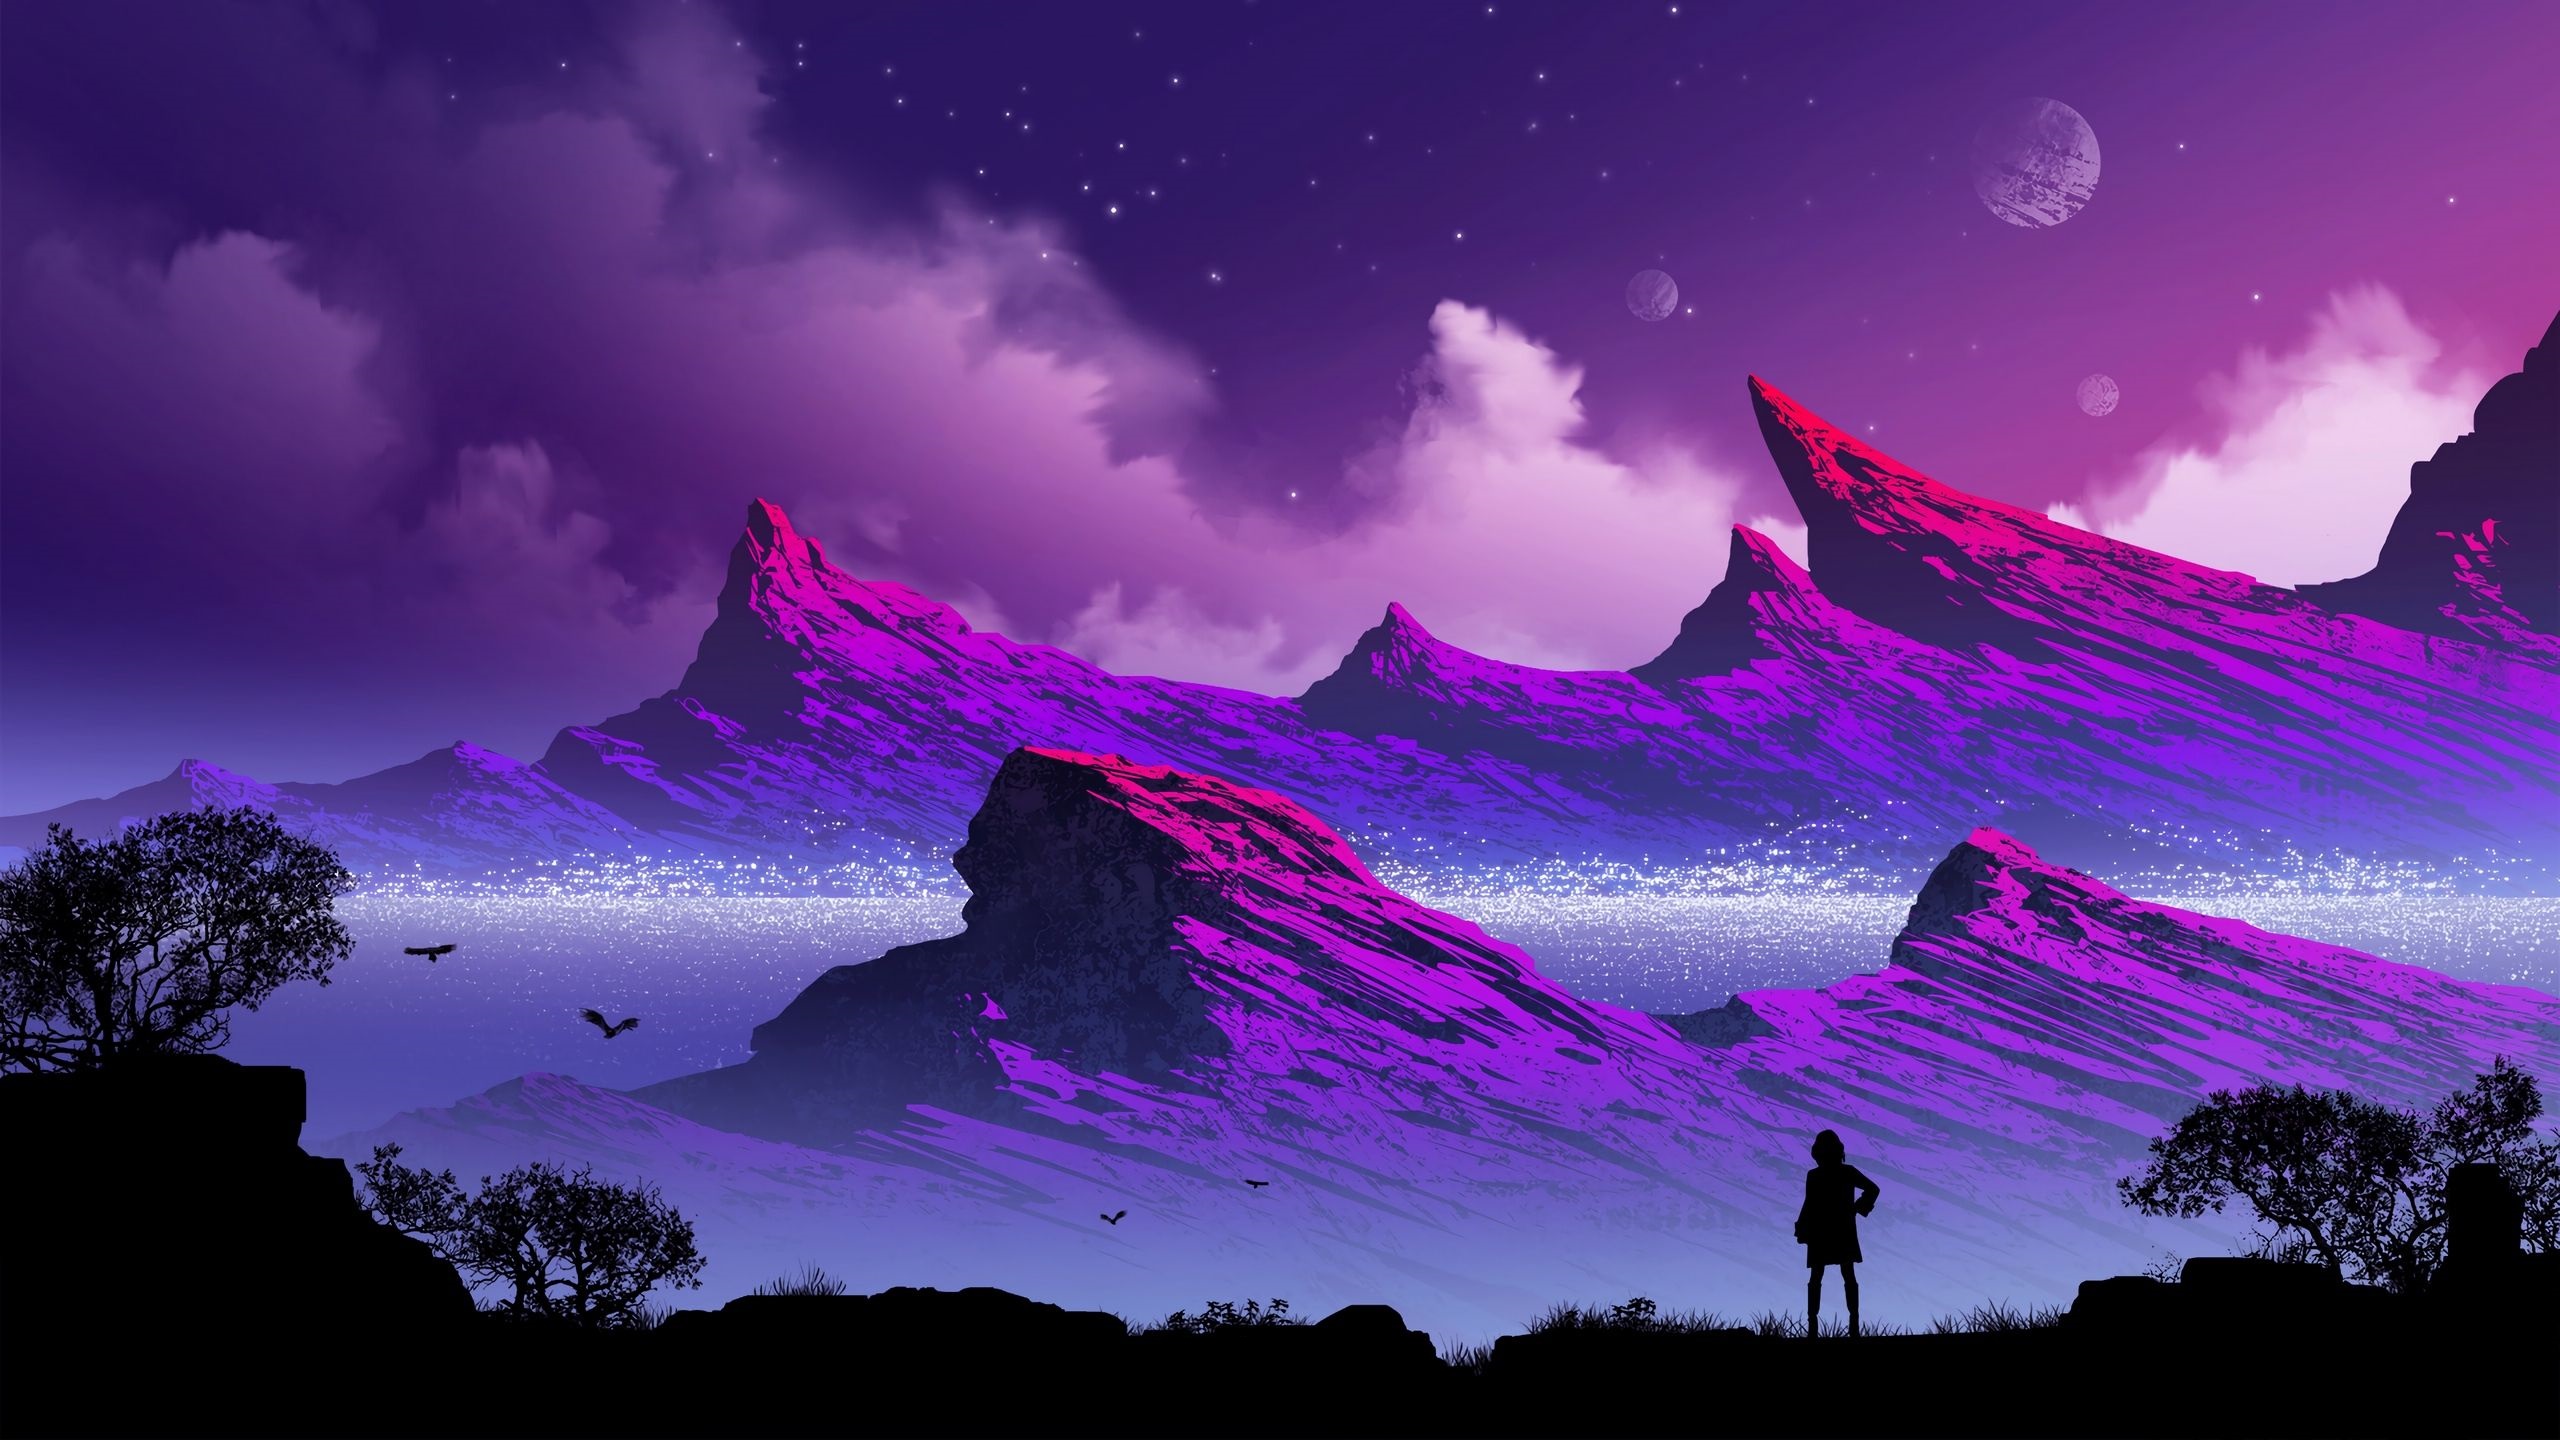 Cool WQHD, QHD, 16:9 Wallpapers & Best Backgrounds - Download Free 2560x1440  HD Images